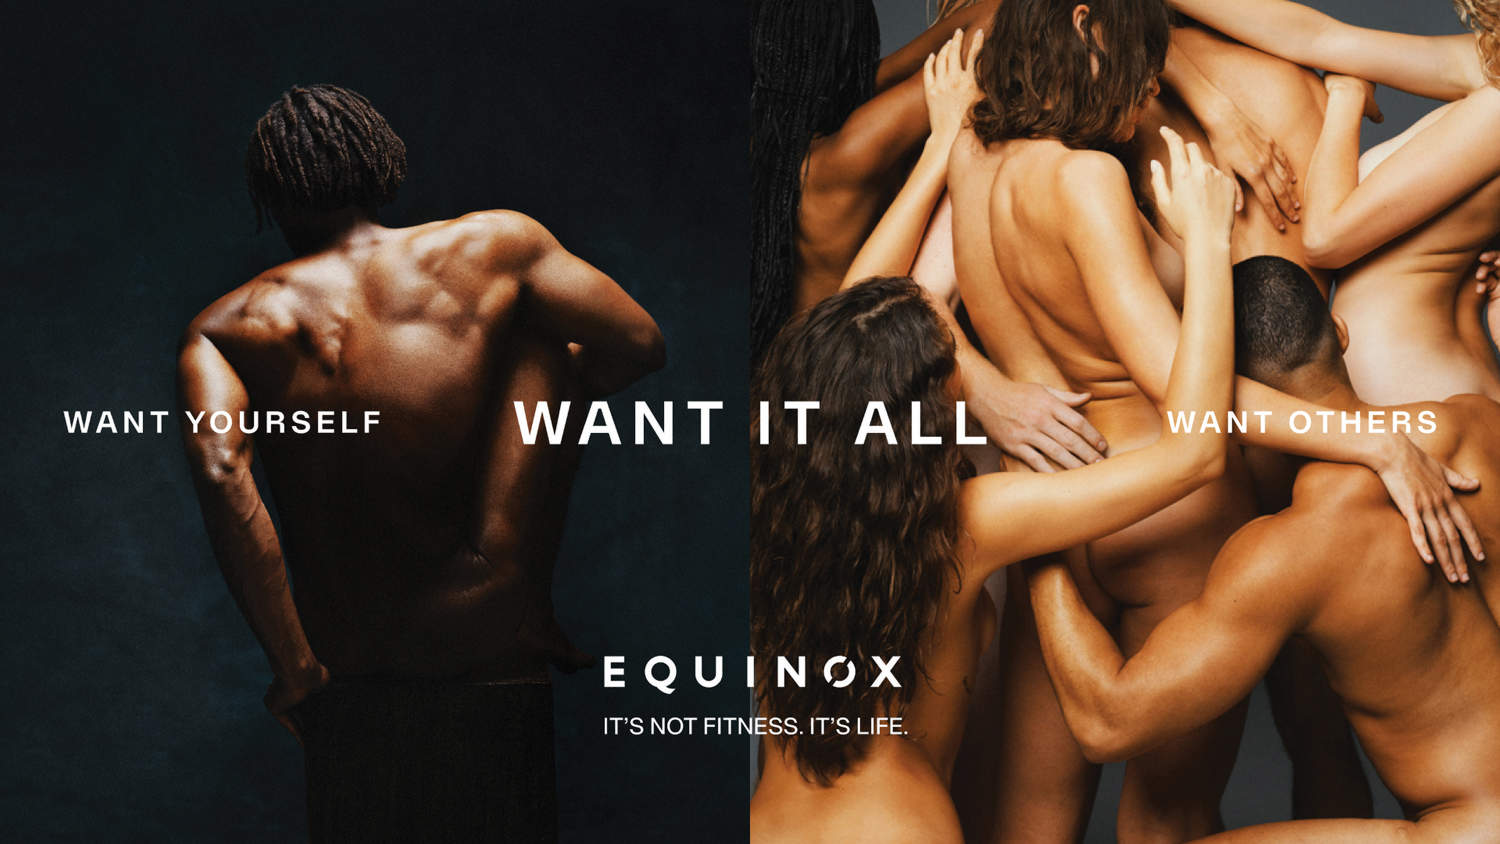 How The Equinox ‘Want It All’ Campaign Came Together